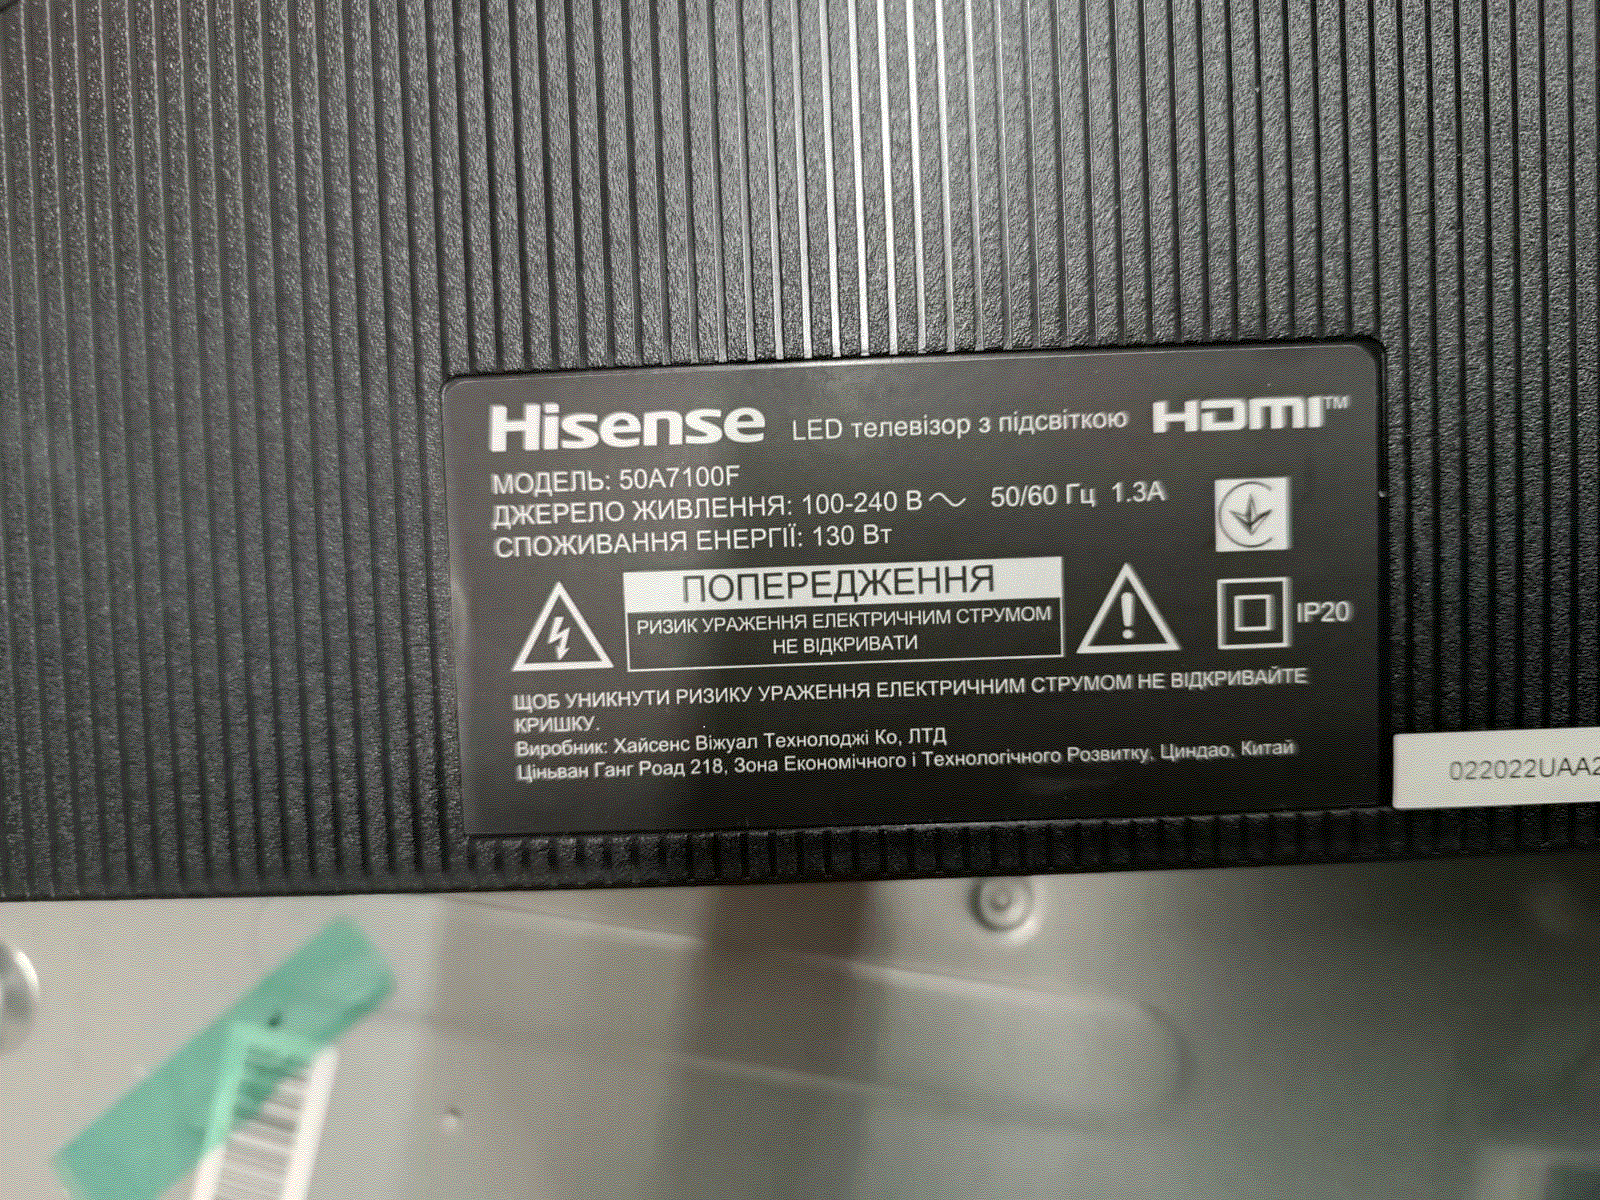 More information about "Hisense 50A7100F, Rsag7.820.10316/ROH, прошивка еммс."